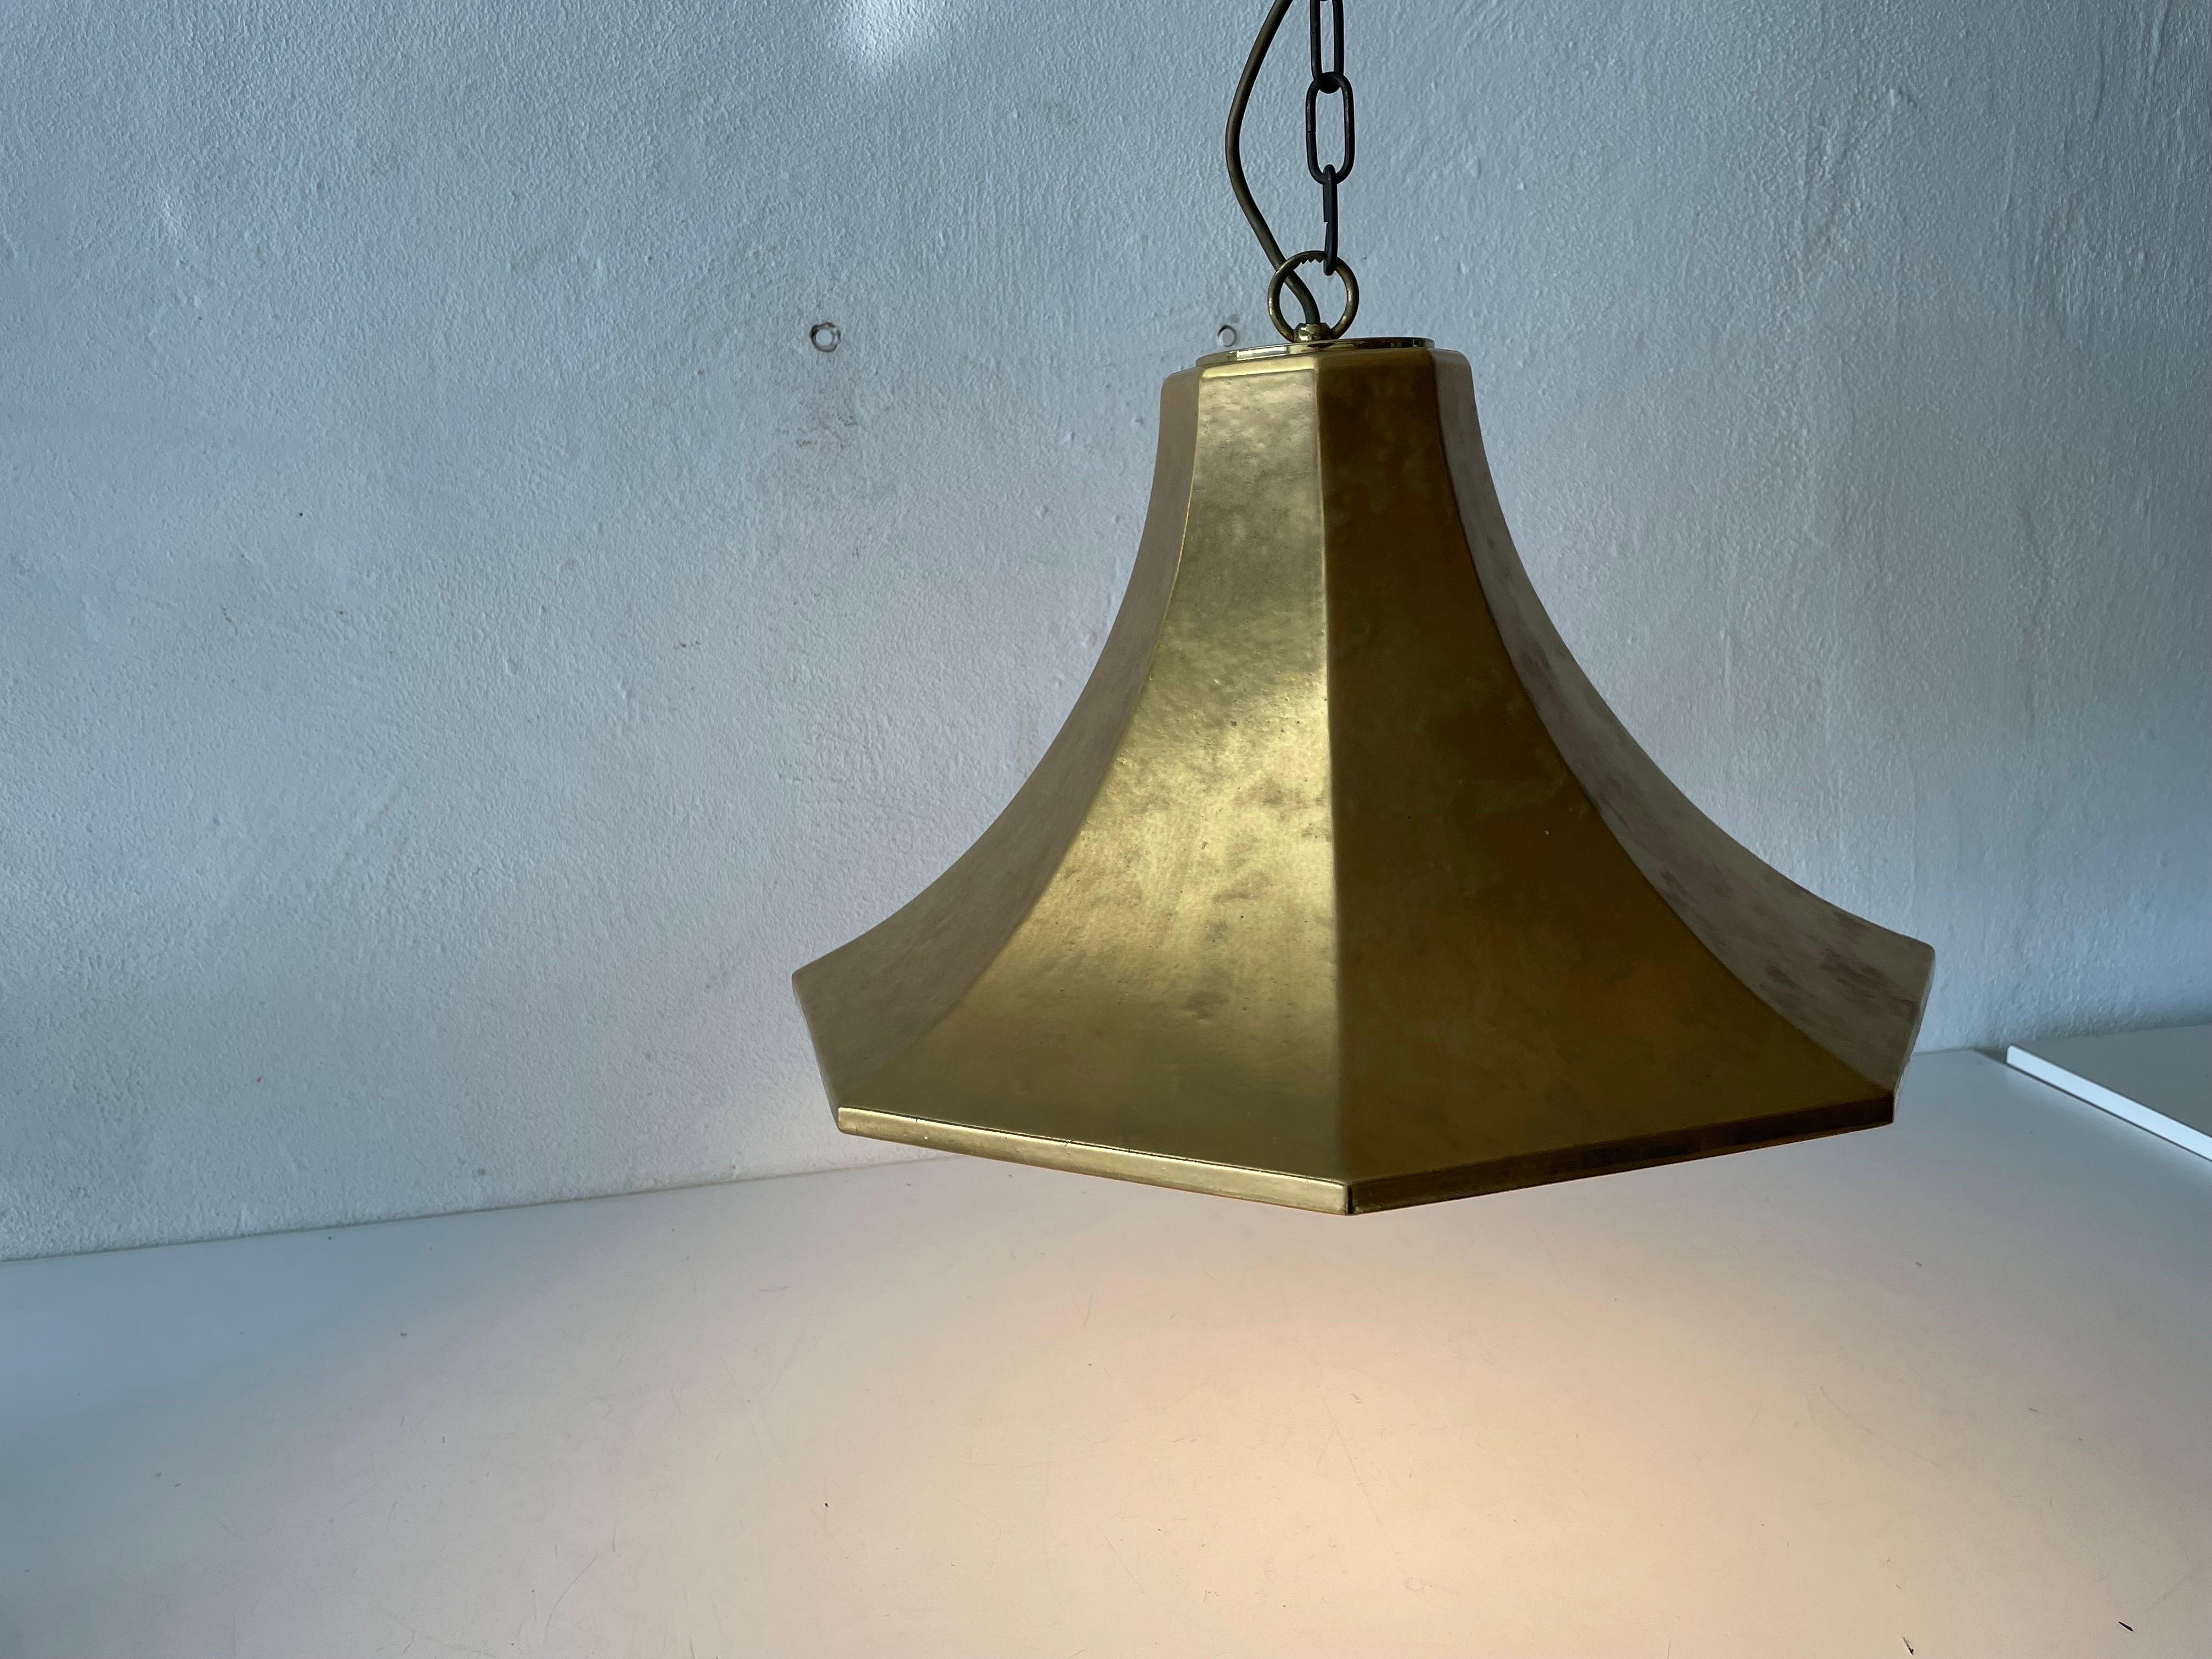 Exclusive Gold Ceramic Pendant Lamp by Licht+Wohnen, Karlsruhe, 1970s, Germany For Sale 9